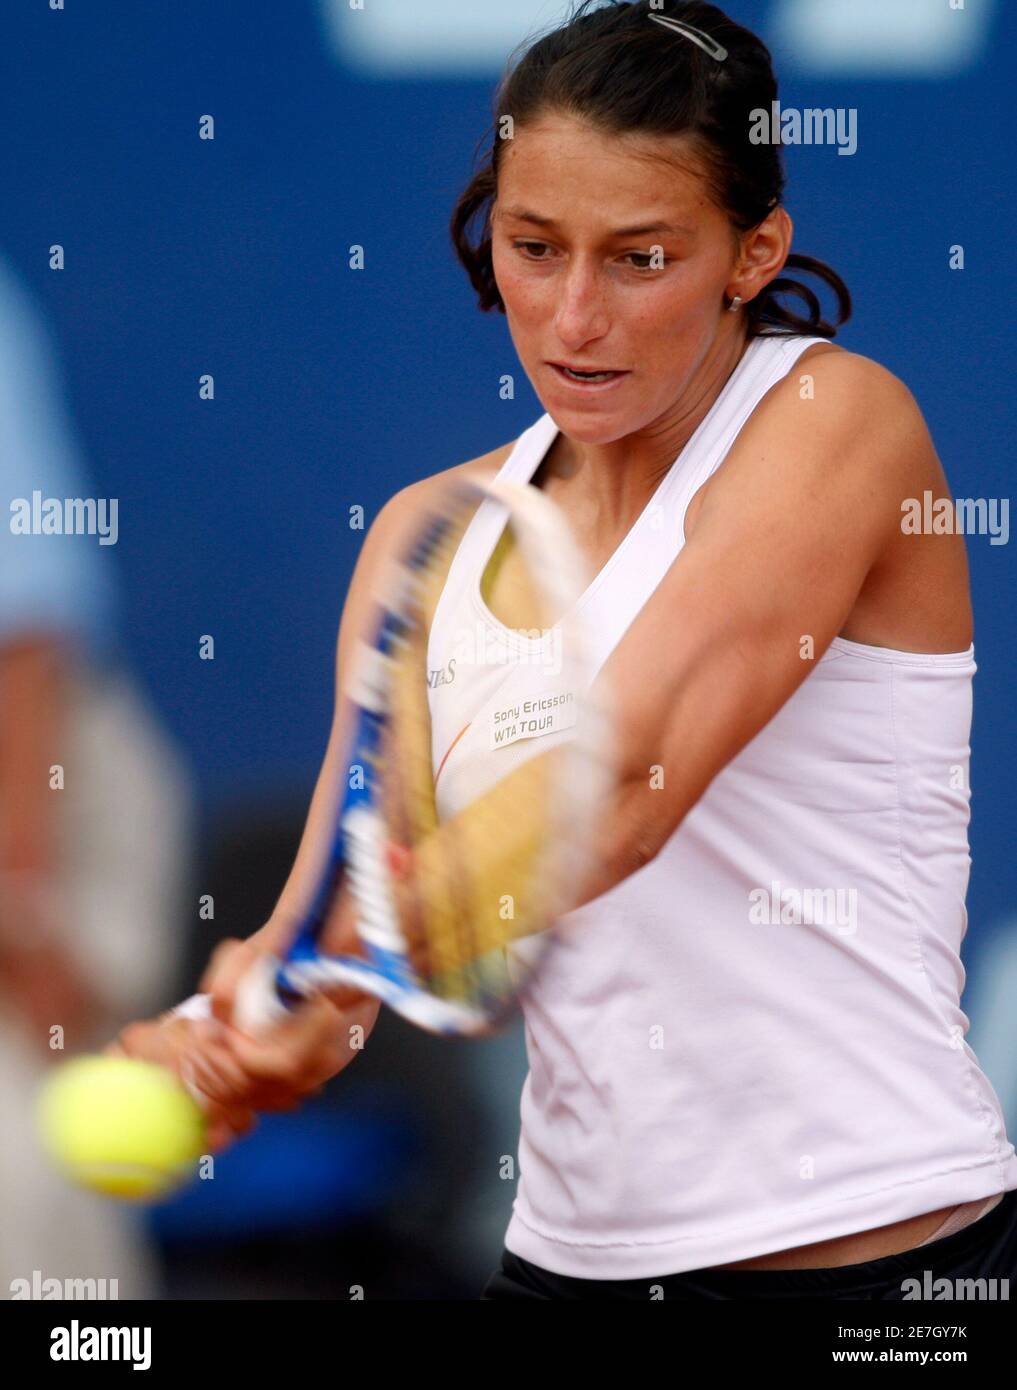 Colombia's Mariana Duque Marino returns a ball to Angelique Kerber of  Germany during the WTA Bogota Tennis tournamment final match in Bogota  February 21, 2010, in Bogota. Mariana won 6-4, 6-3. REUTERS/John